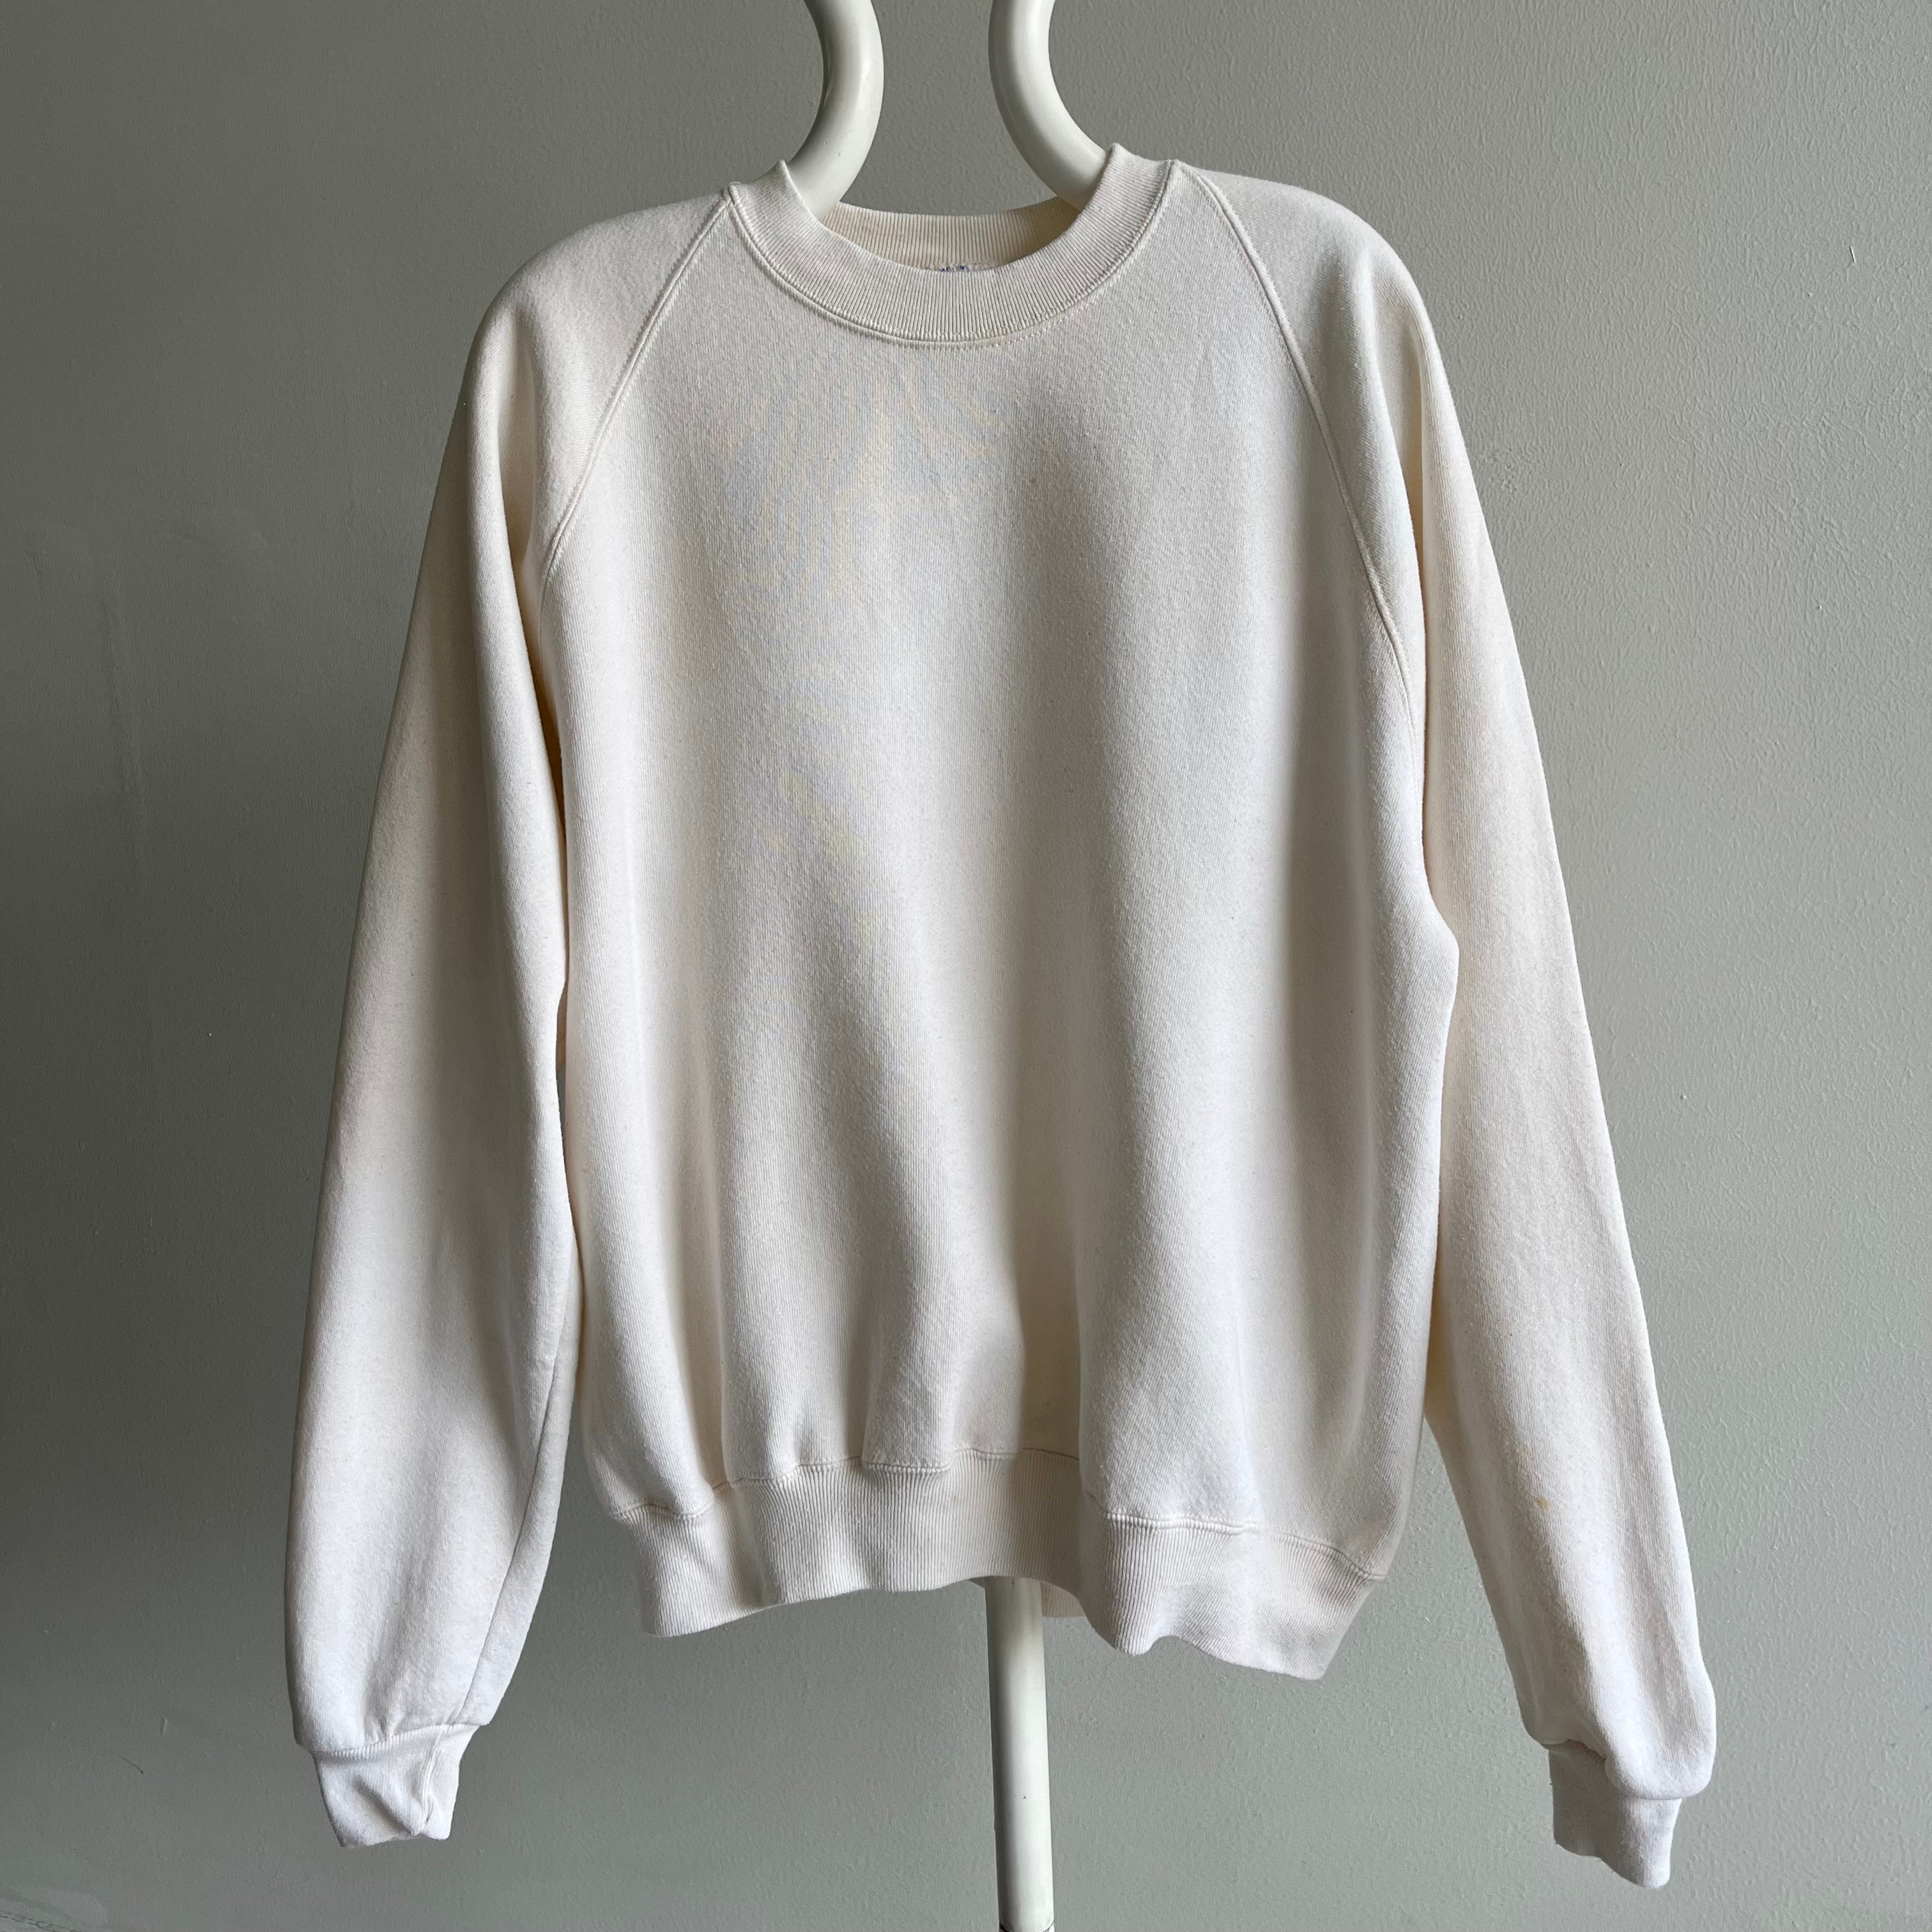 1980s Off White/Natural Sweatshirt by Jerzees